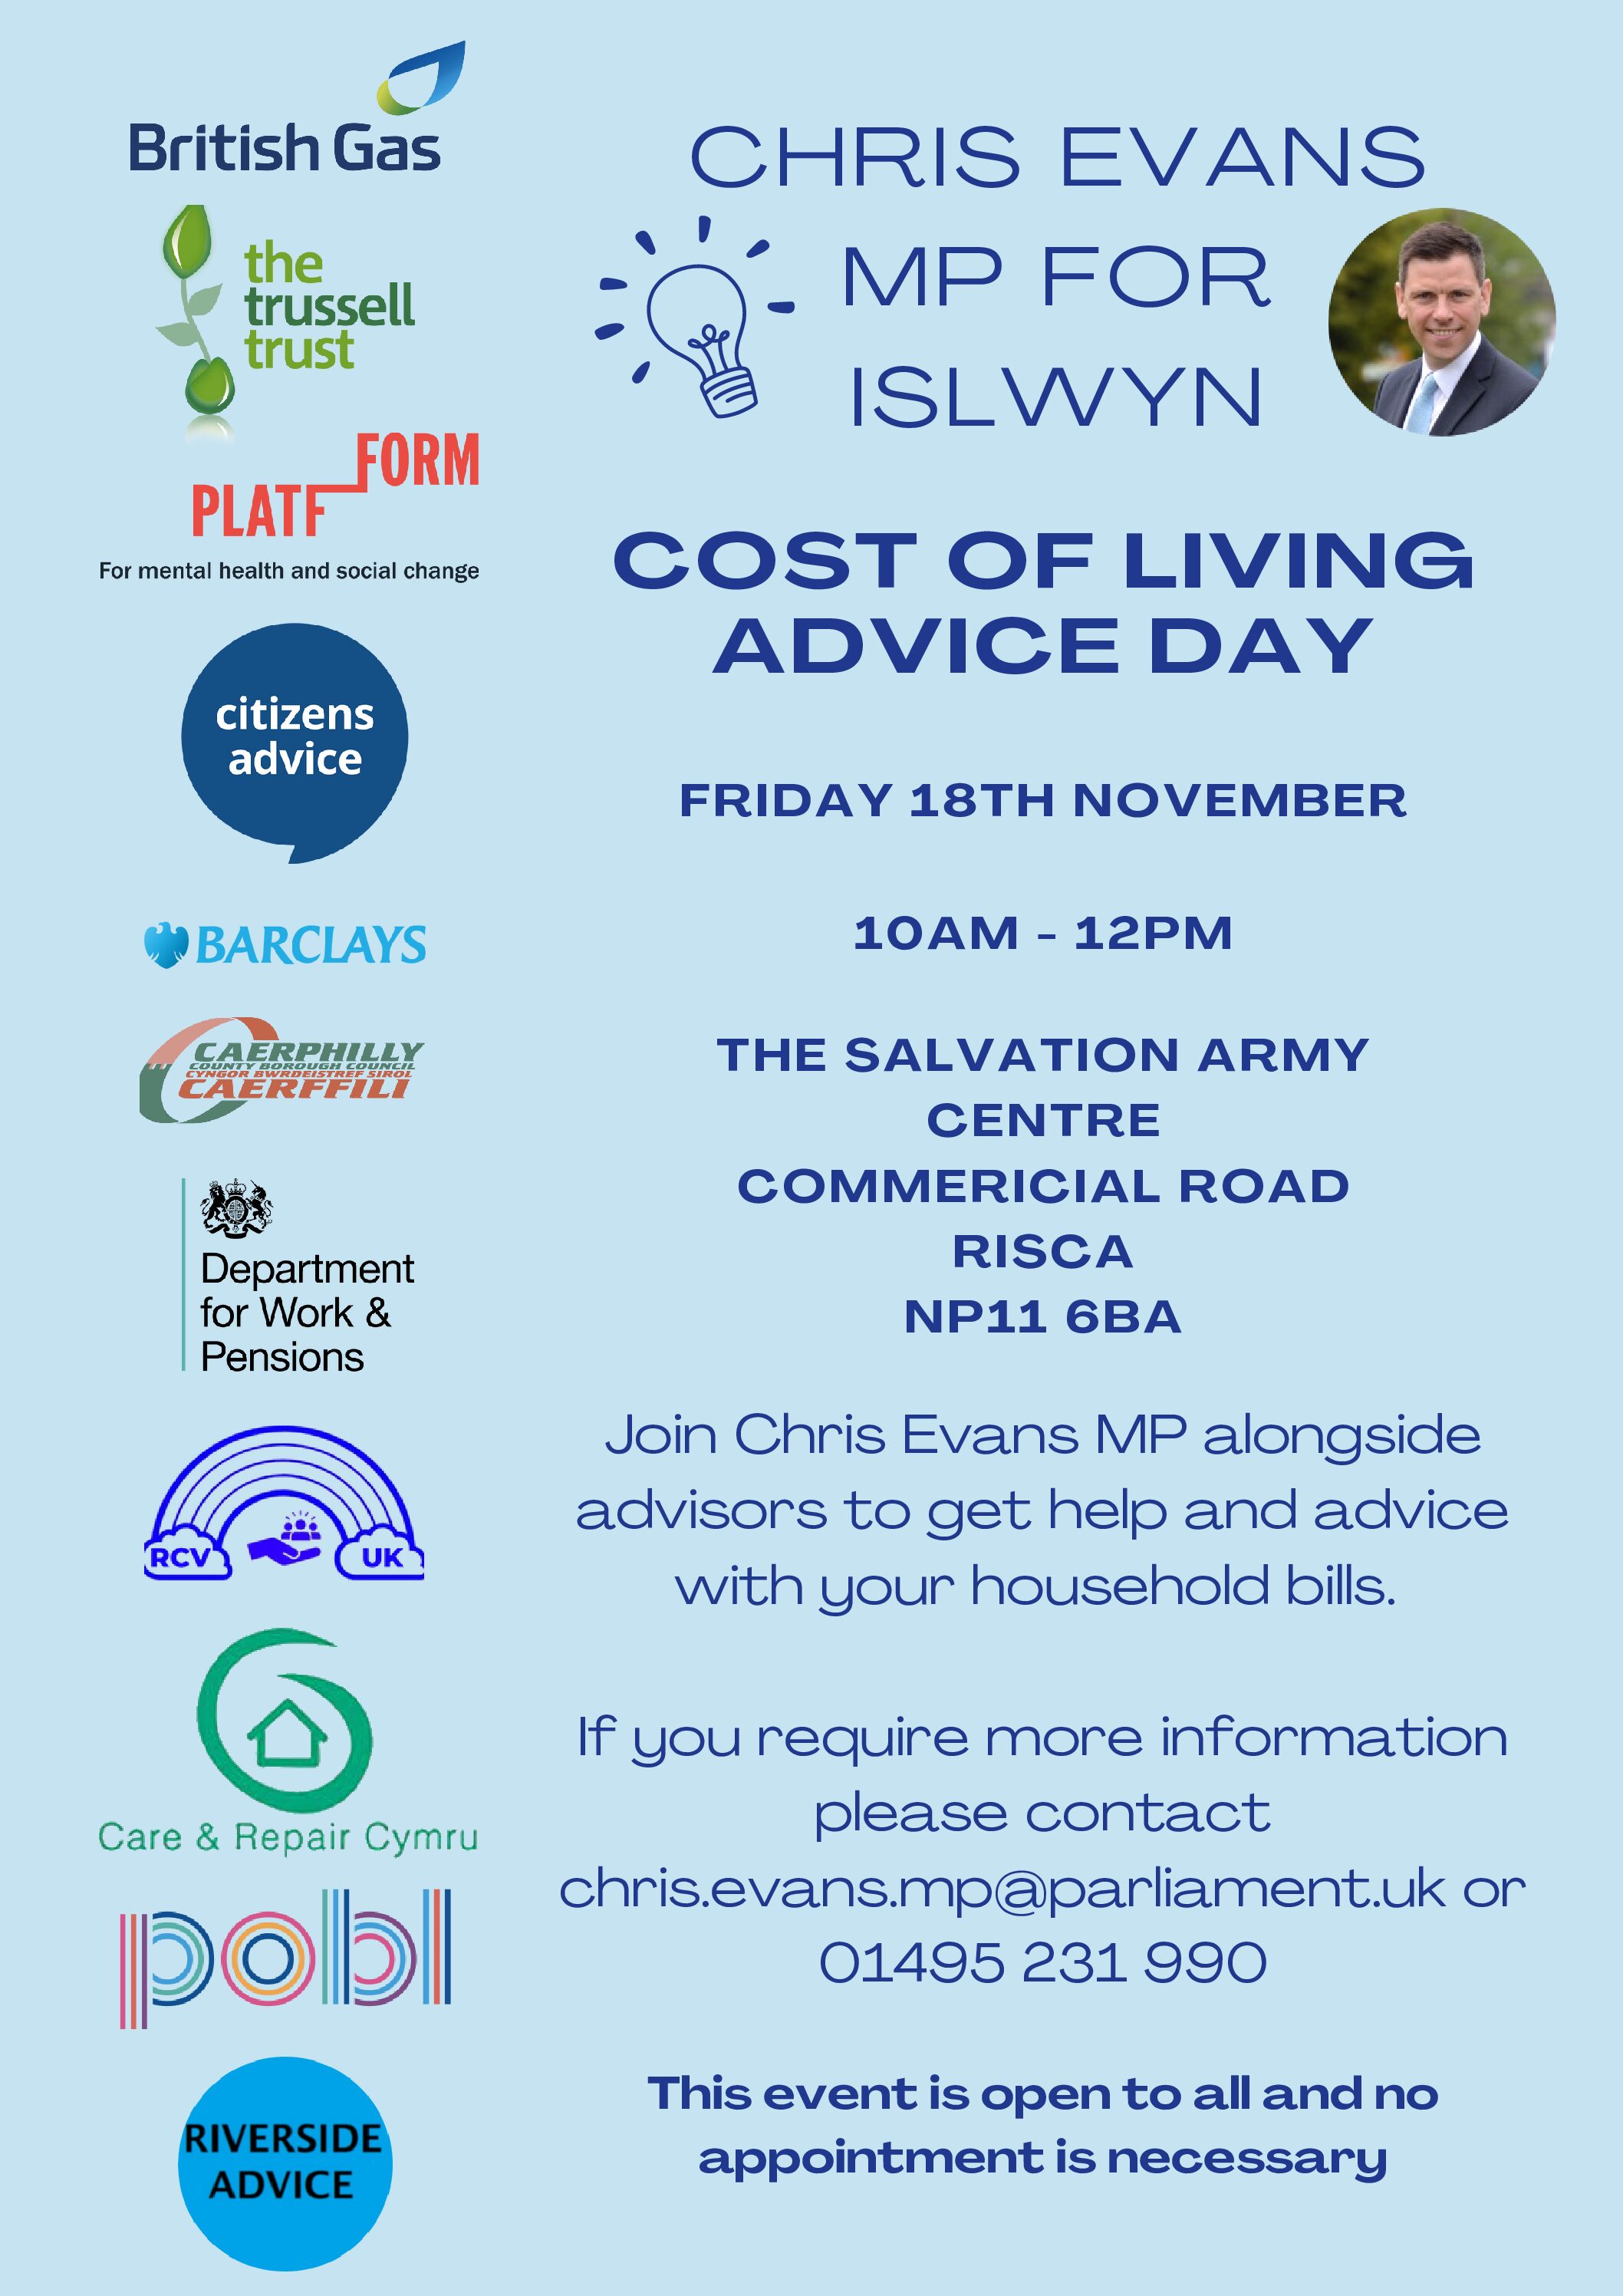 Chris Evans MP hosts Cost of Living Advice Day